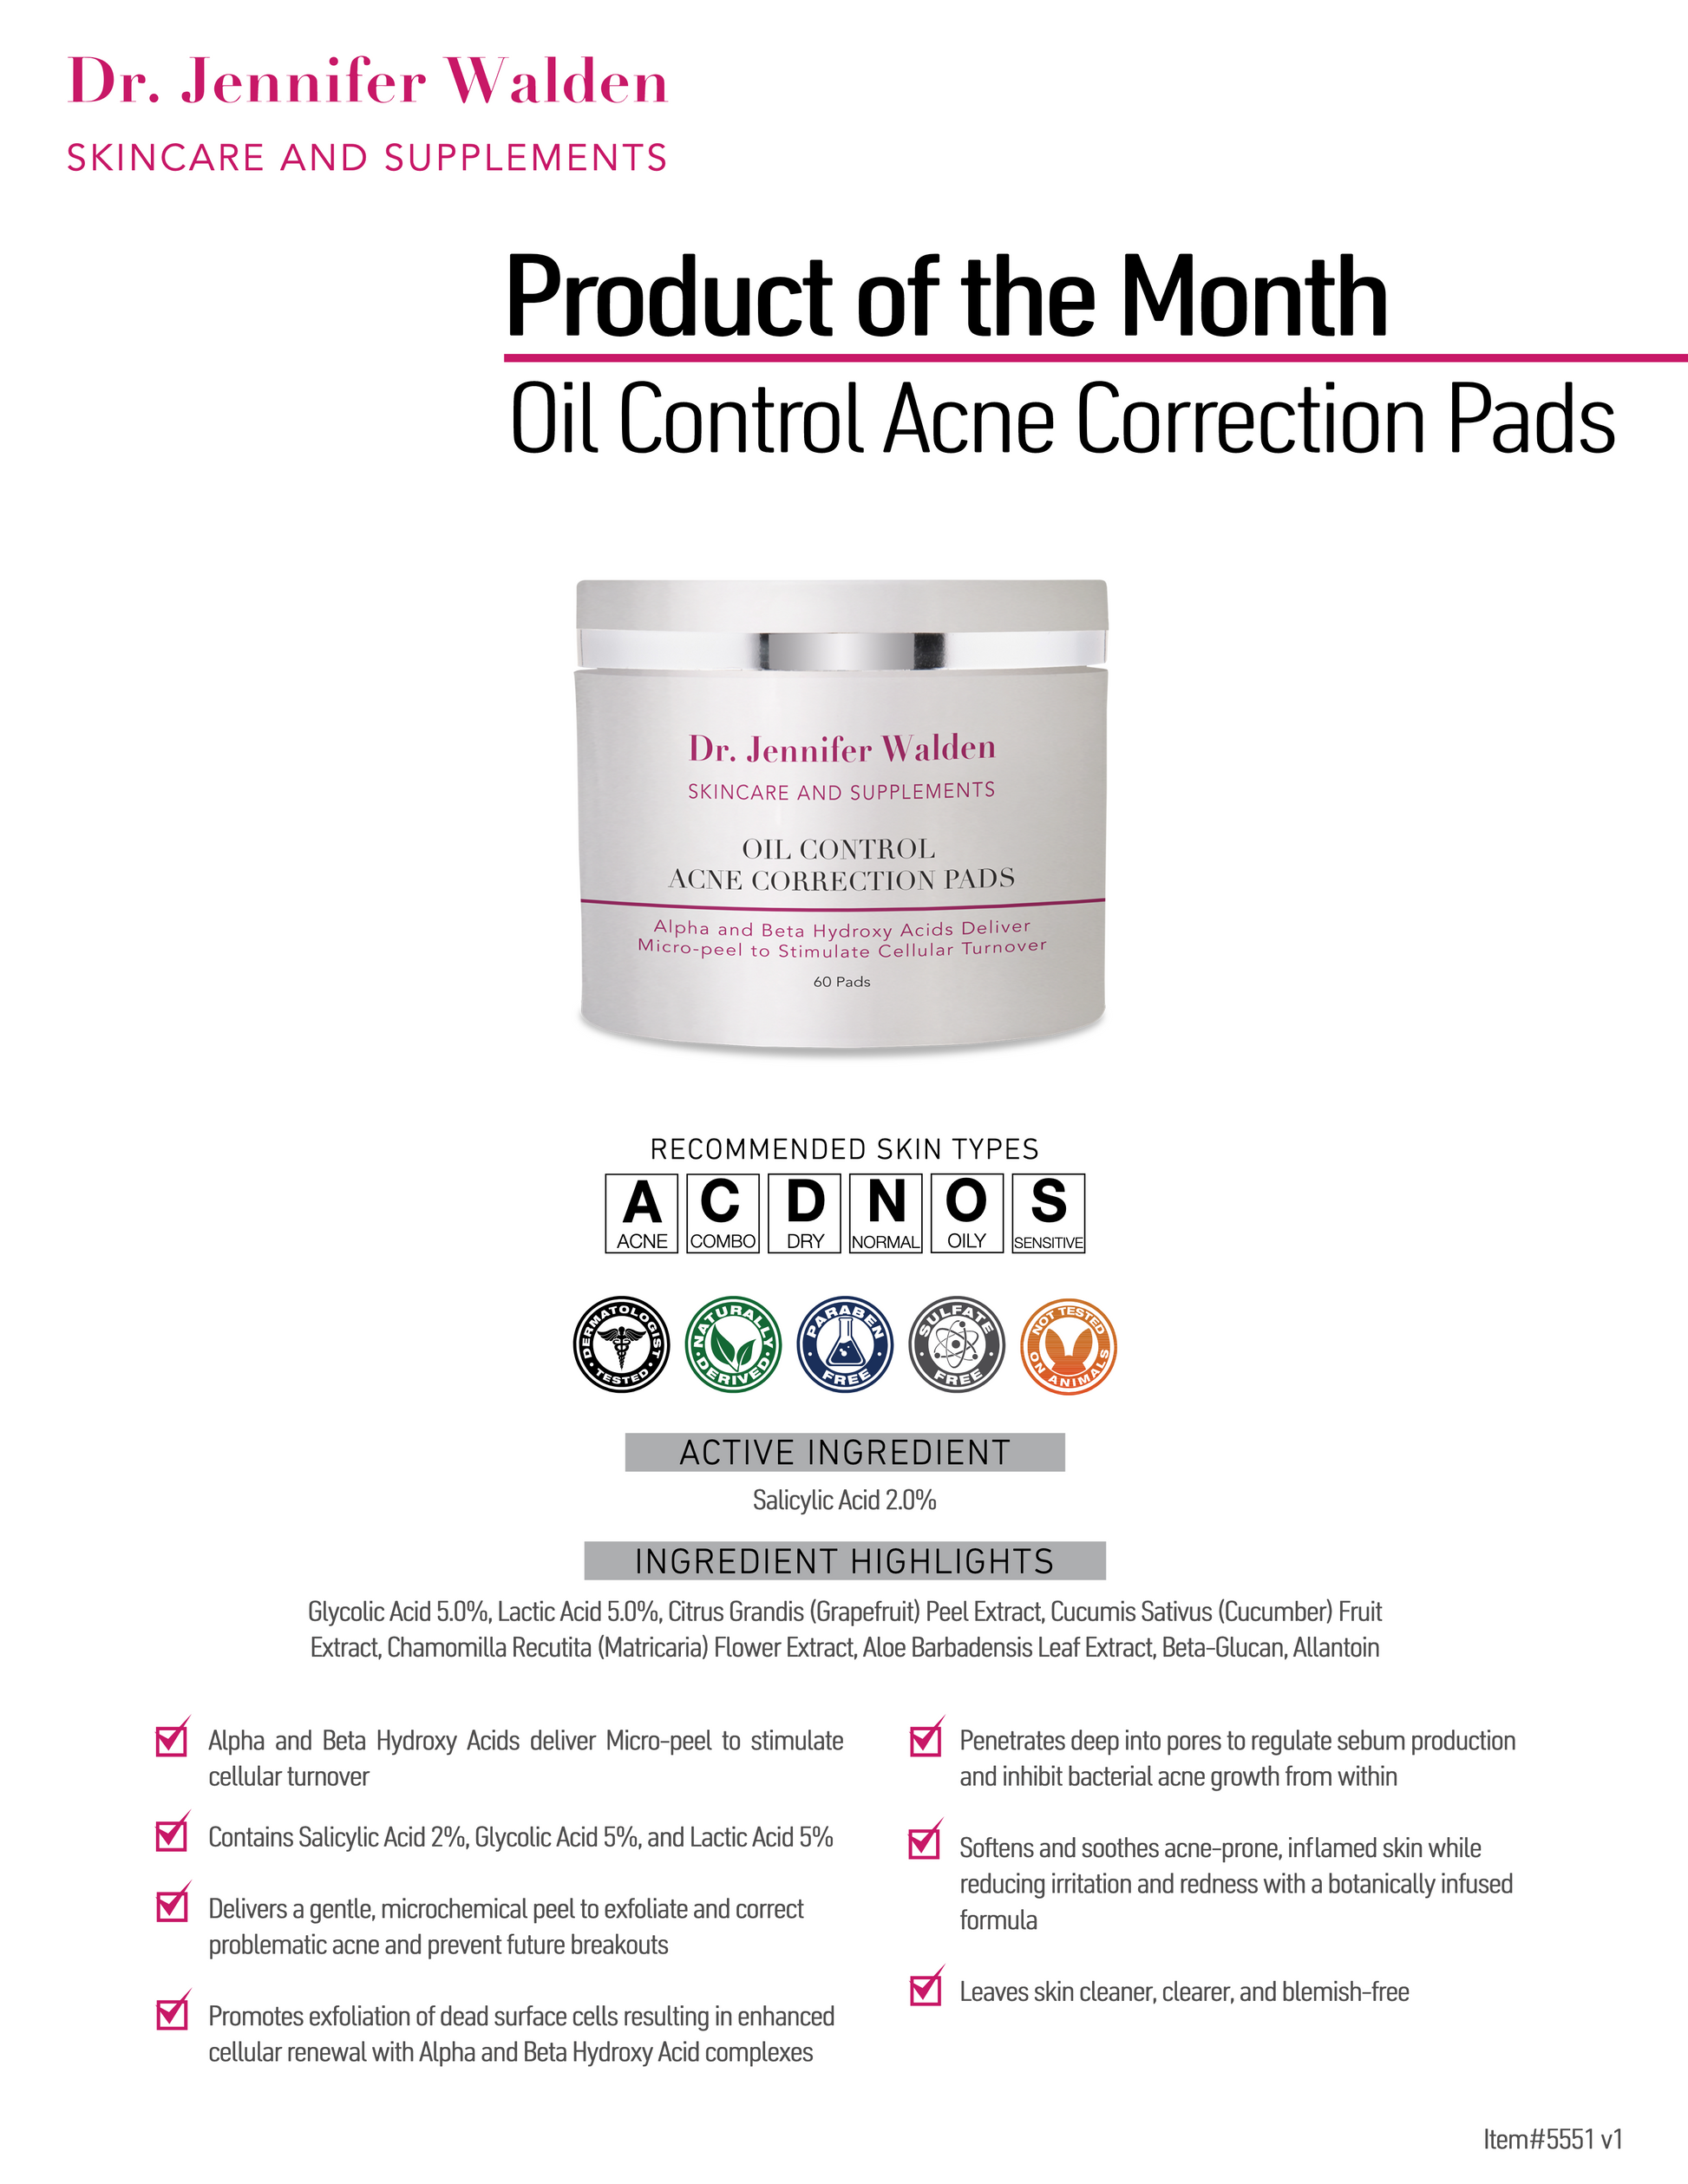 OIL CONTROL ACNE CORRECTION PADS-5